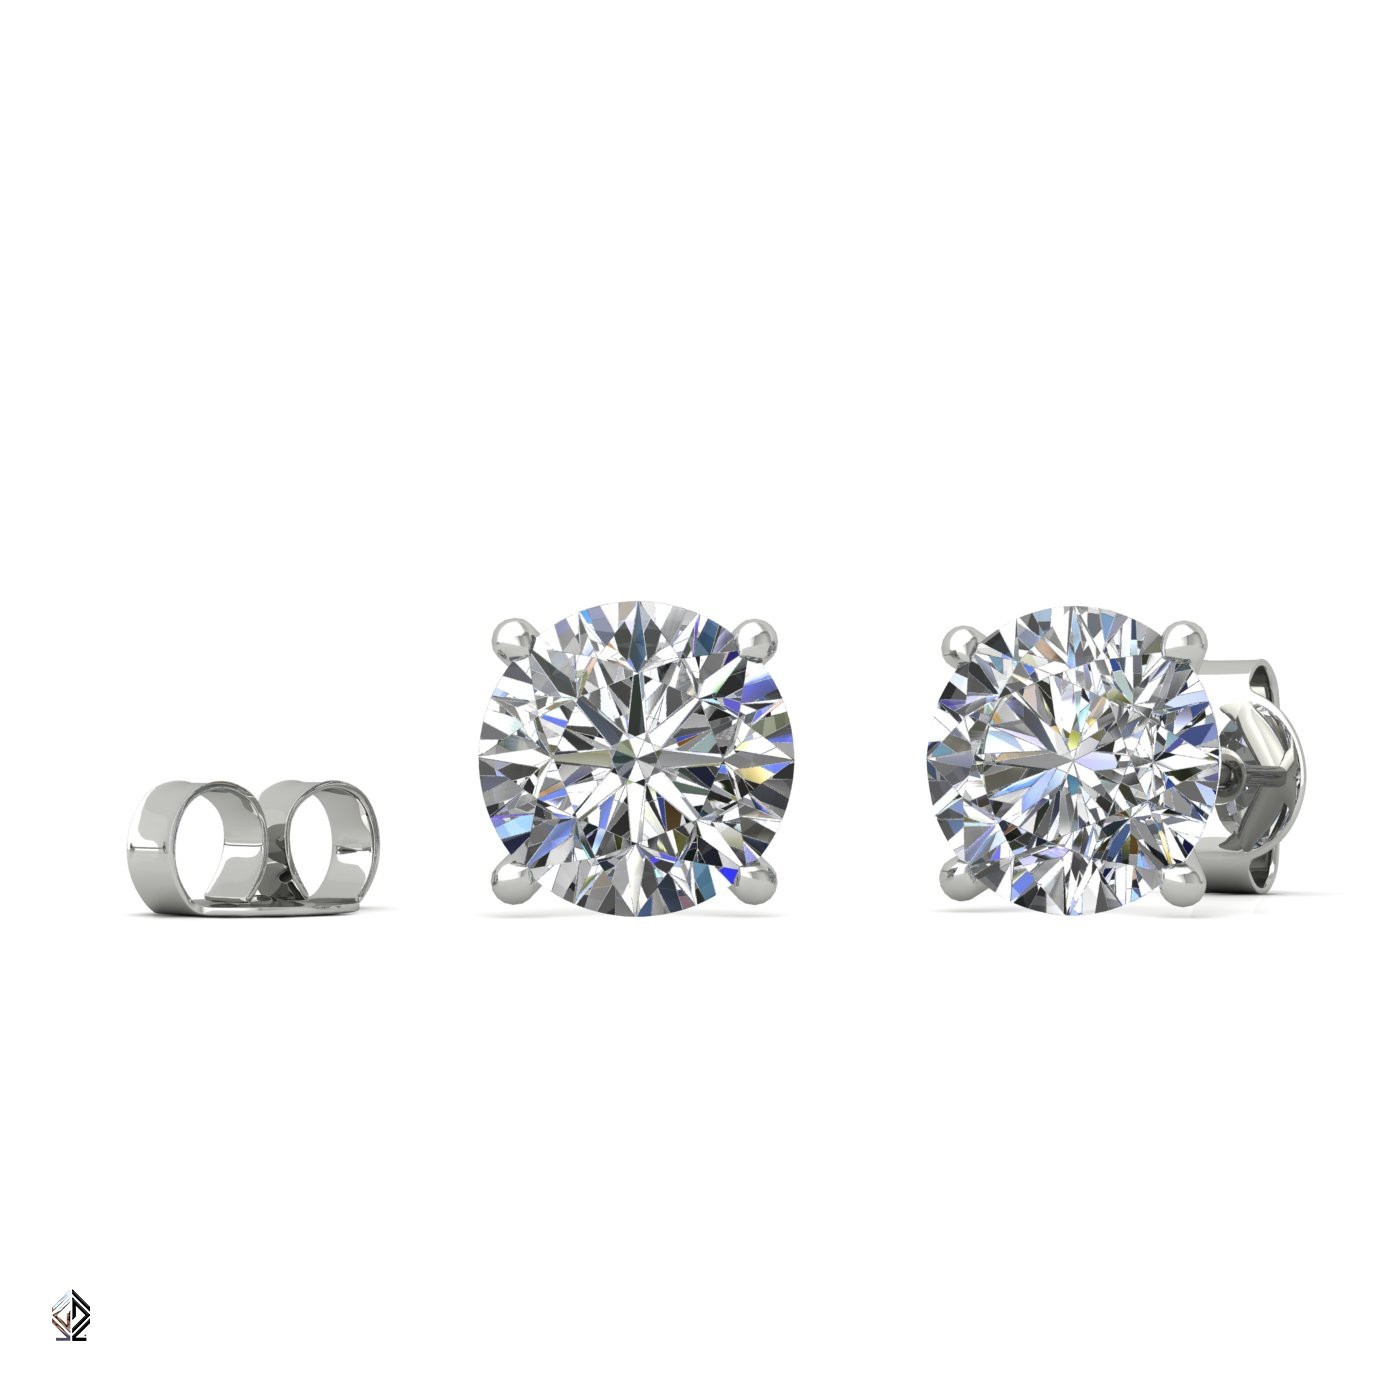 18k white gold 0,5 ct each (1,0 tcw) 4 prongs round cut classic diamond earring studs Photos & images